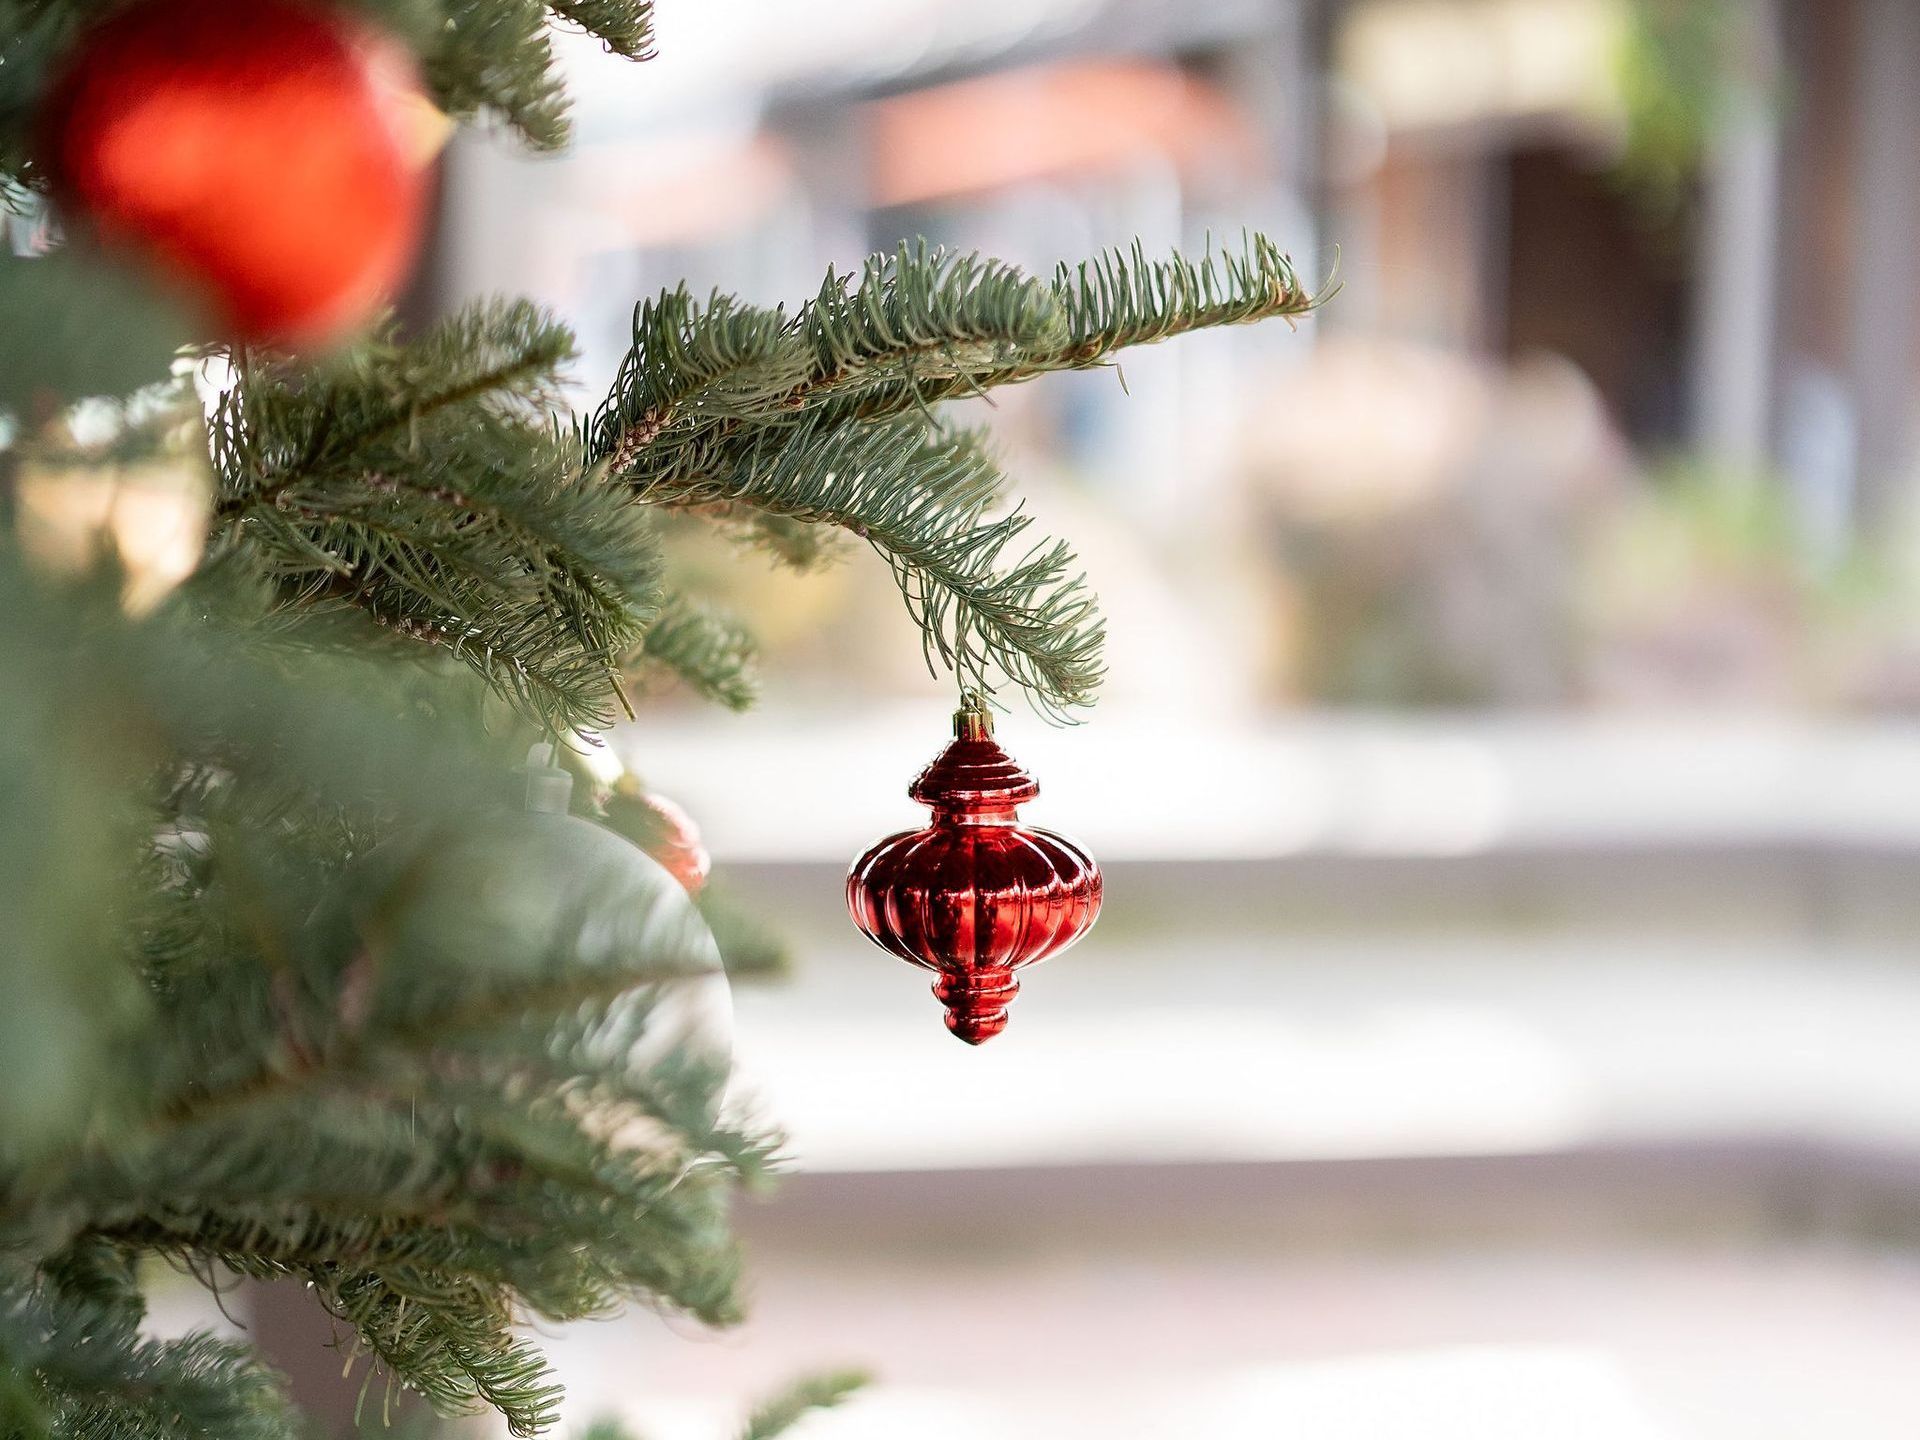 a close up of a christmas tree with red ornaments